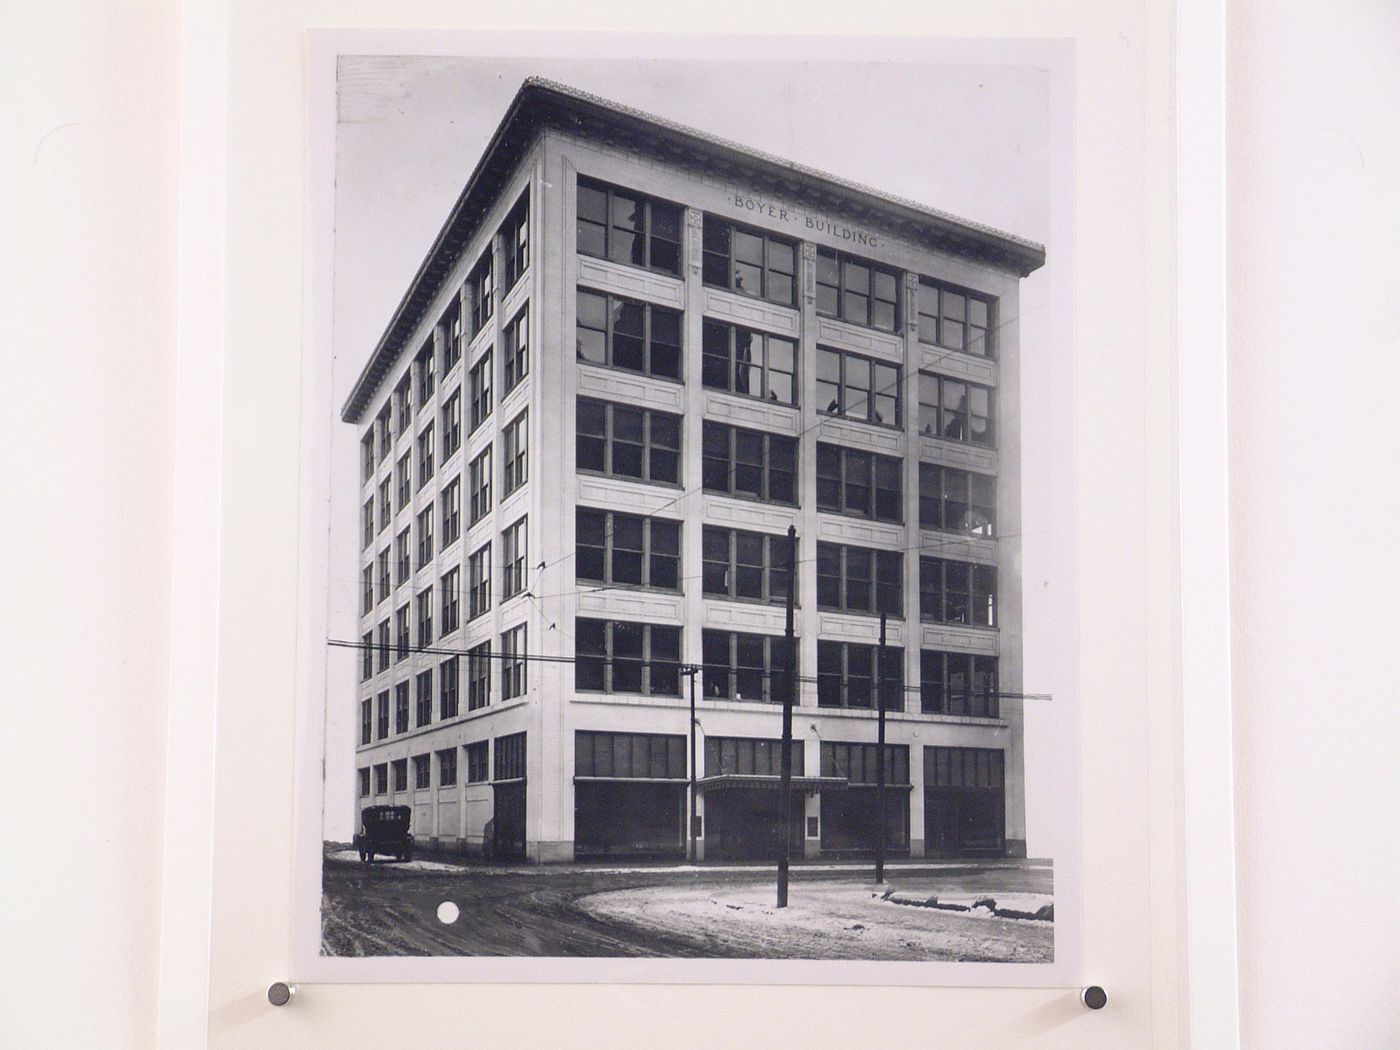 View of the principal and lateral façades of the Boyer Campbell Building, Detroit, Michigan